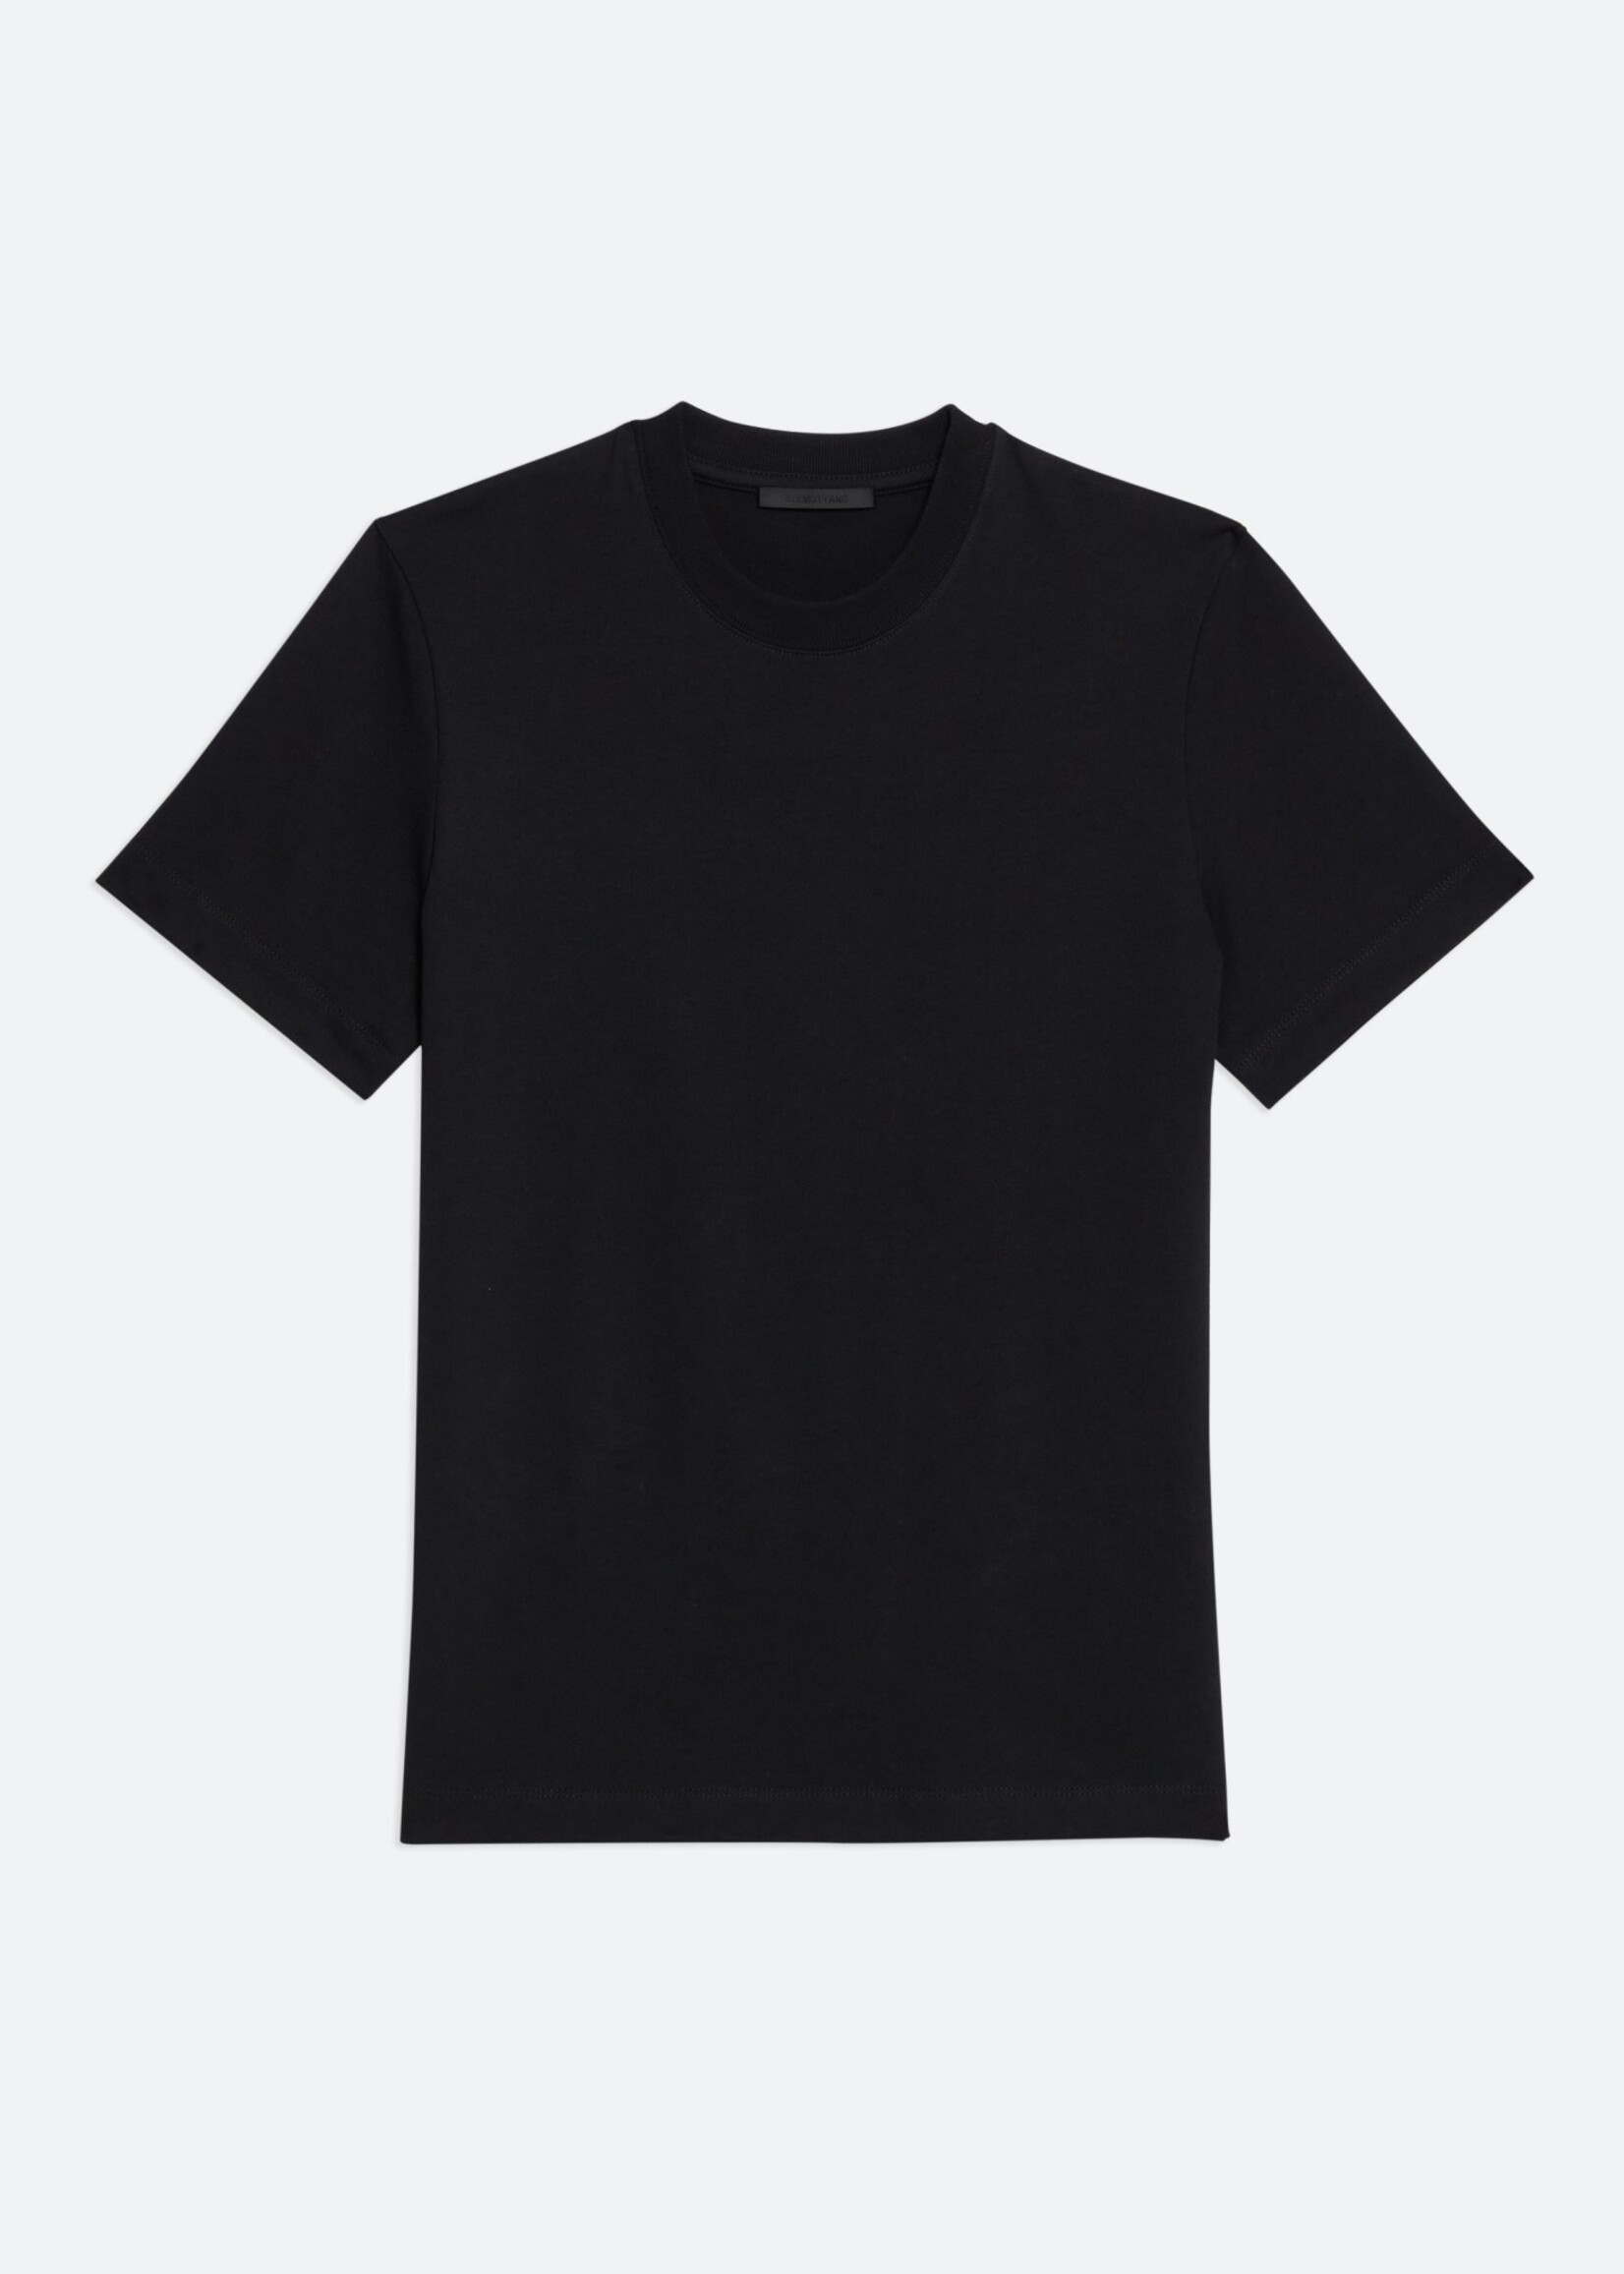 HELMUT LANG BY PETER DO Heavyweight Logo Tee in Black